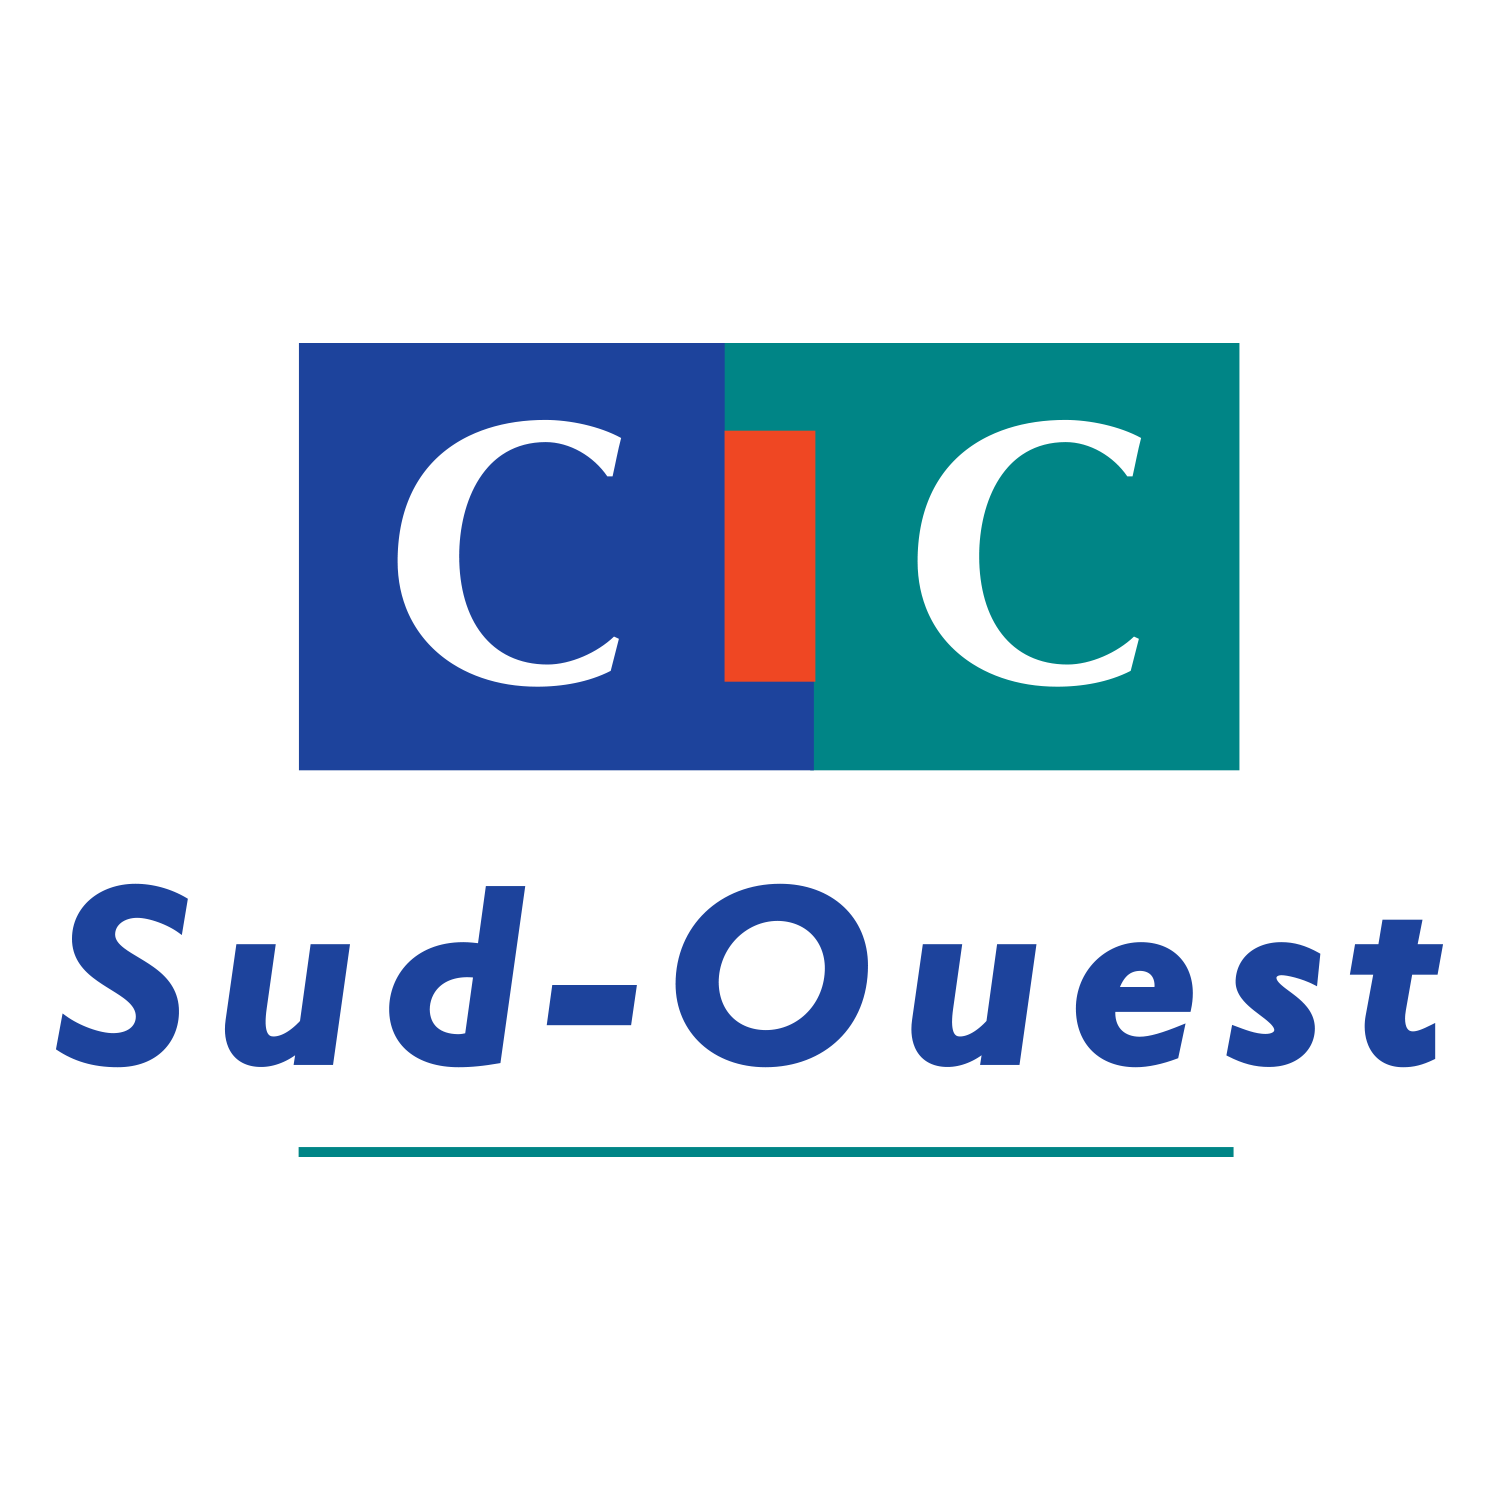 CIC Sud Ouest